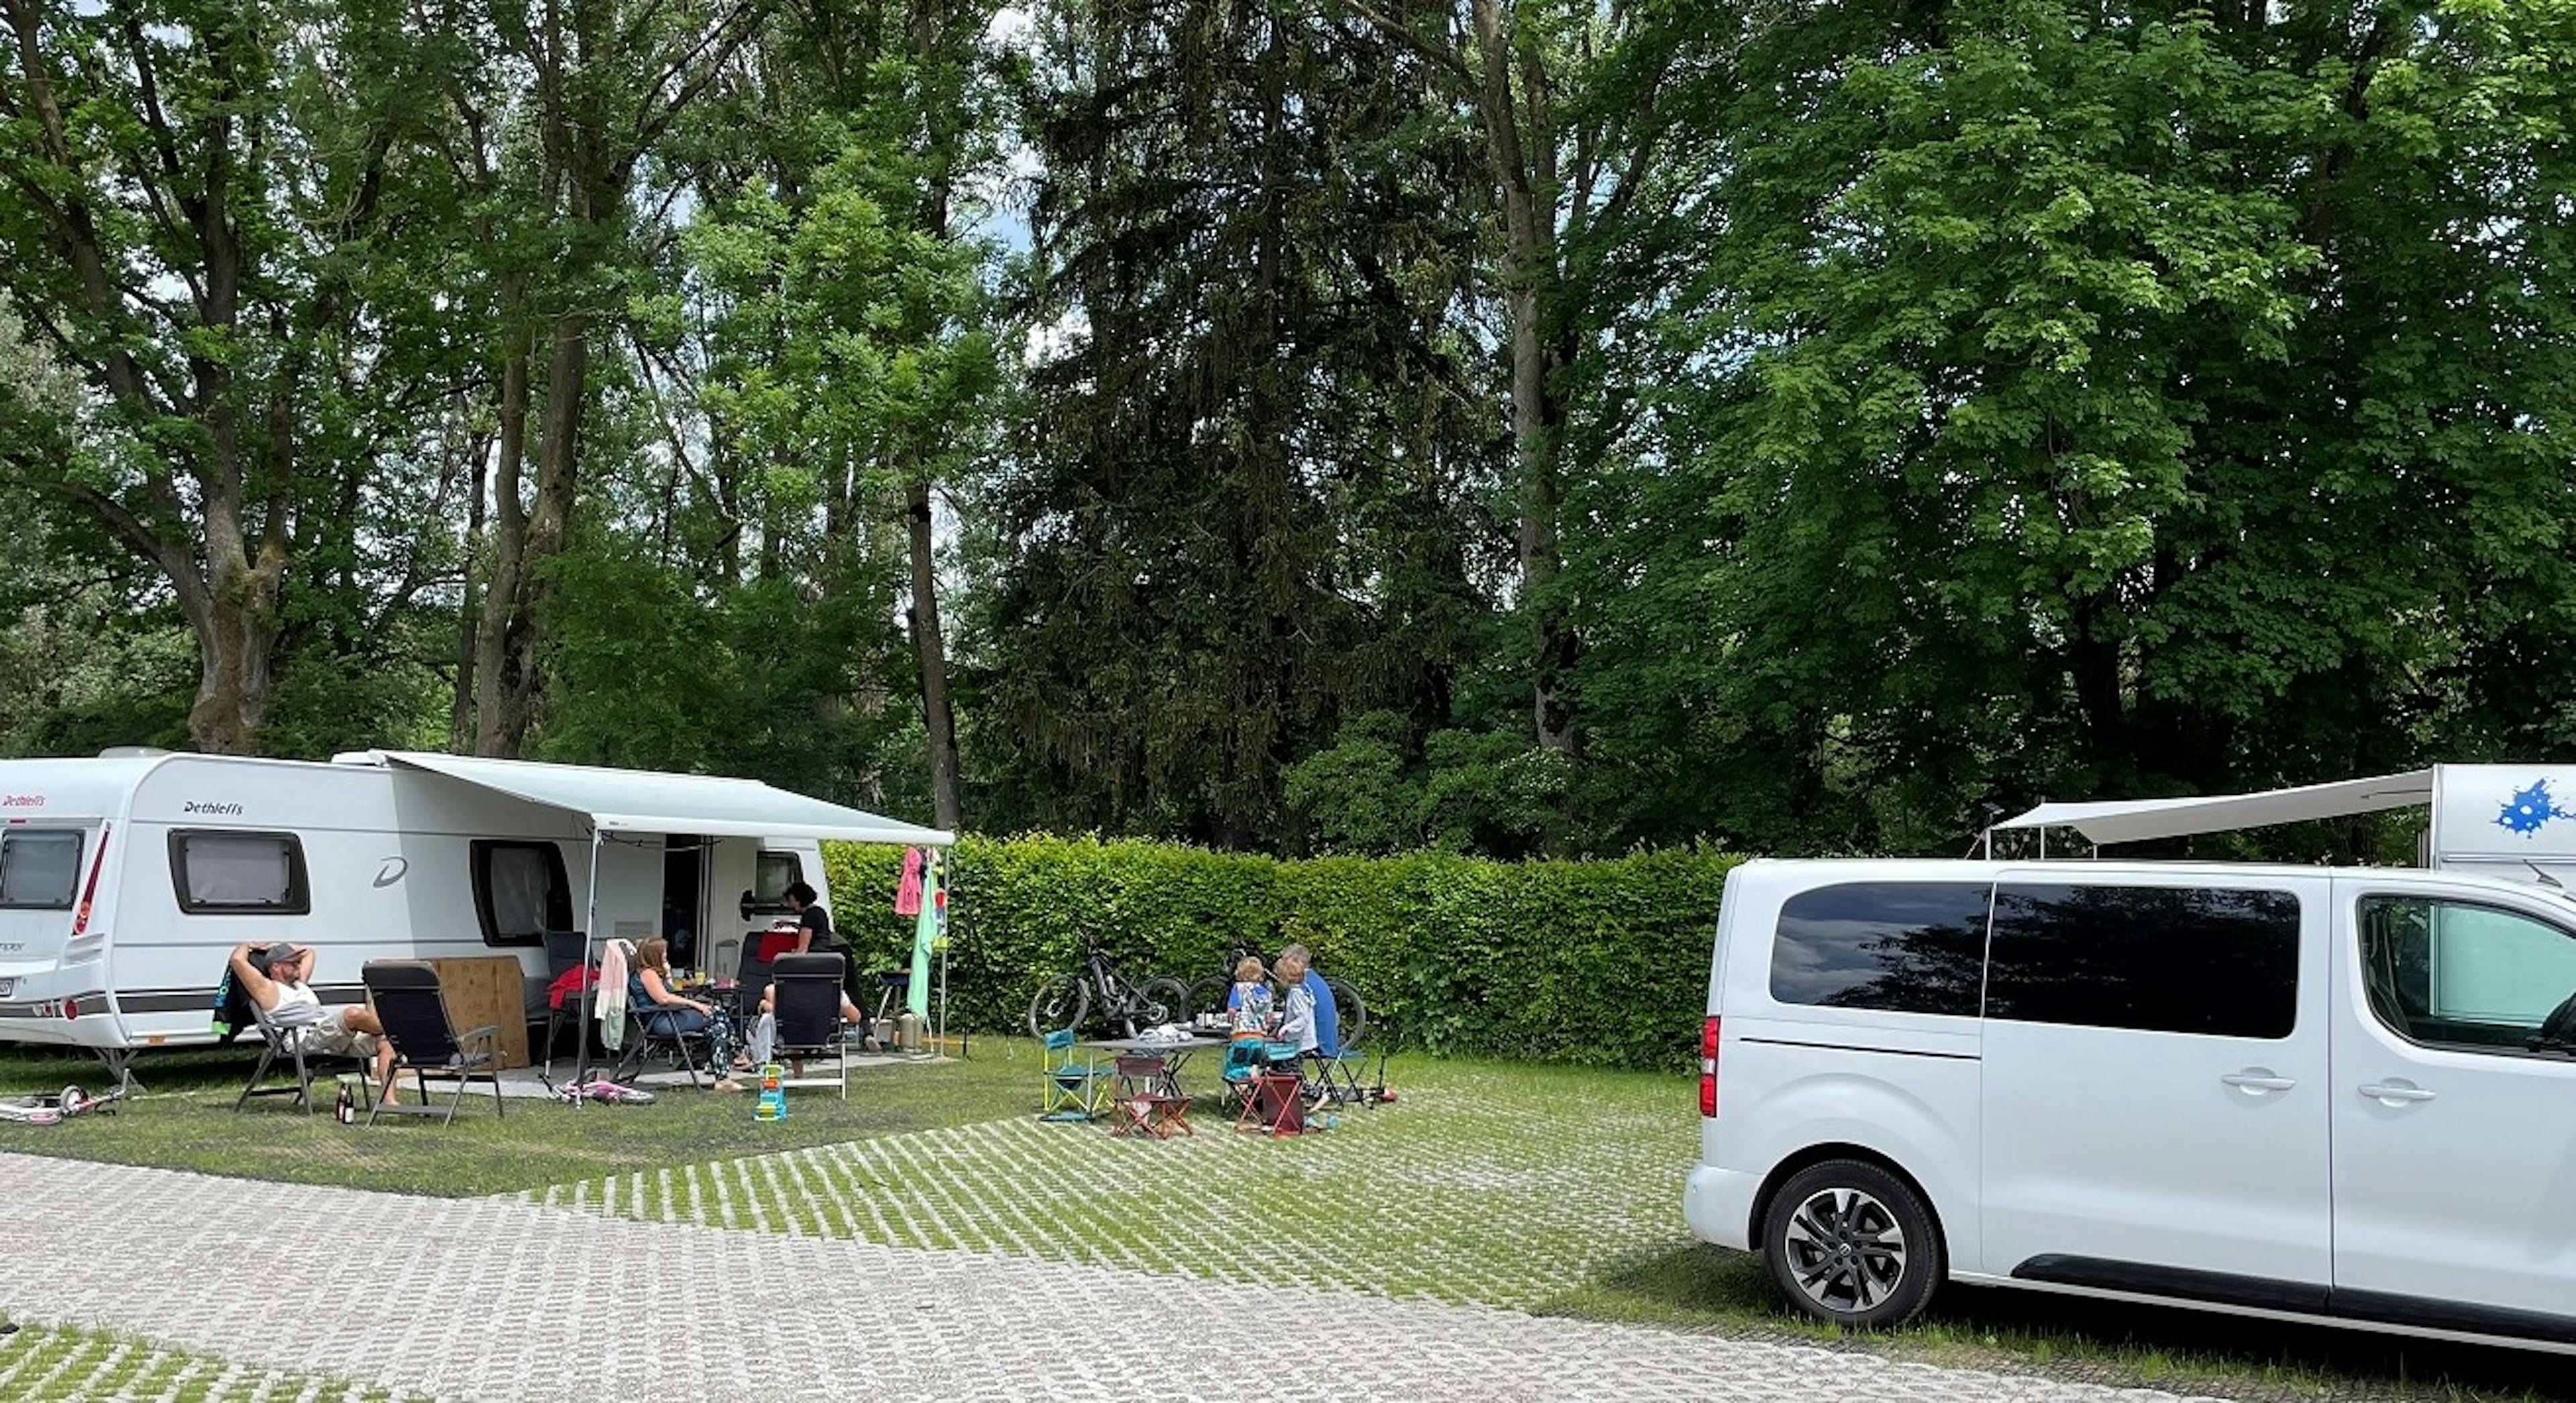 Park-Camping Iller